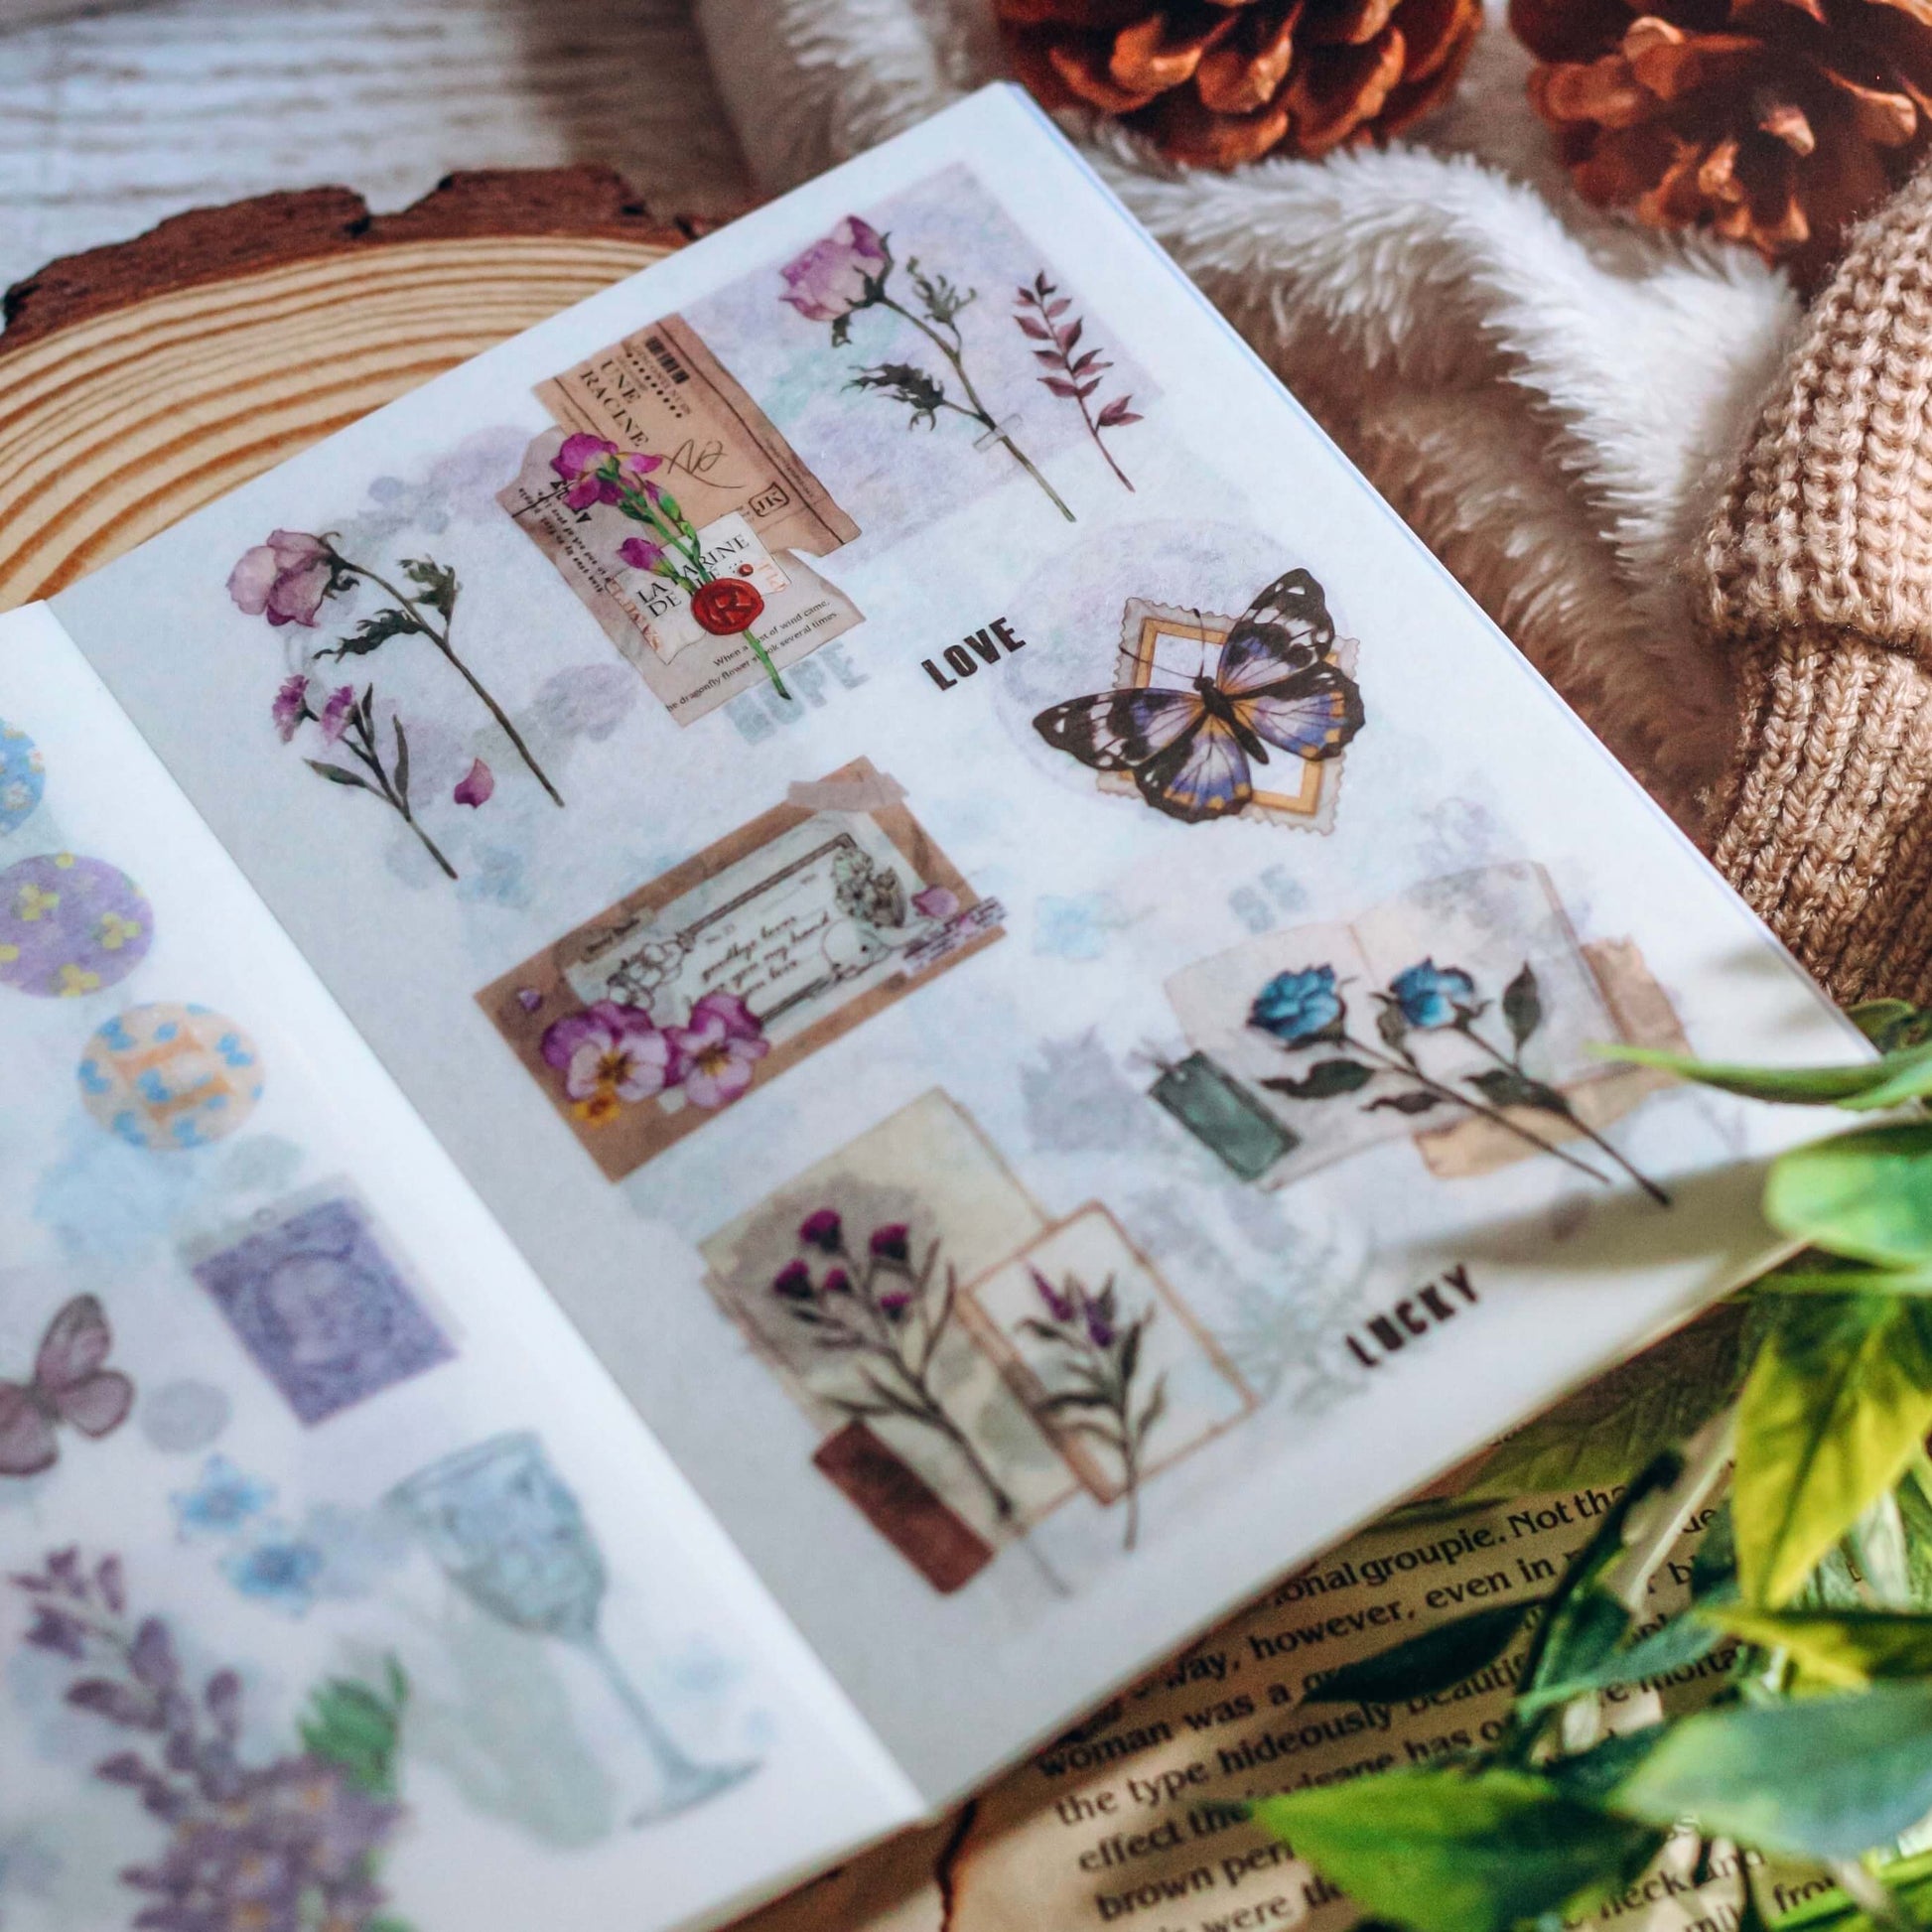 Sticker book page with purple and brown butterfly and decorations